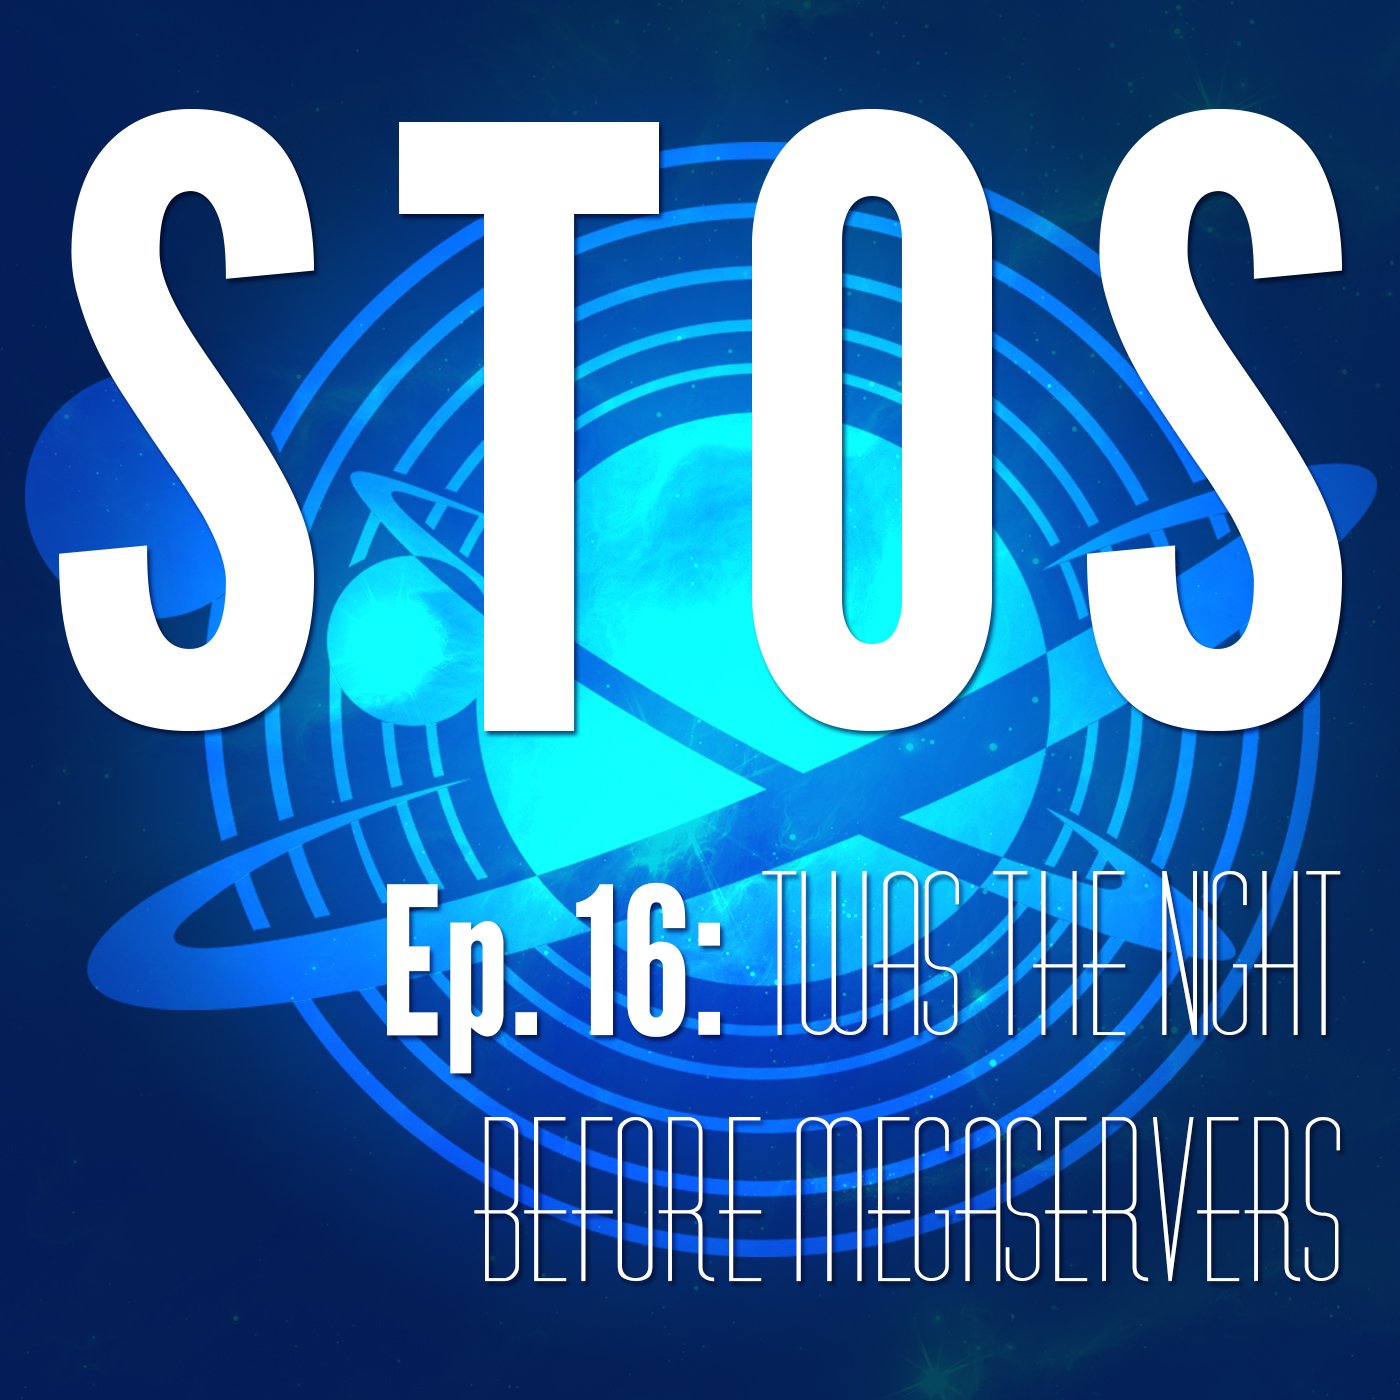 Ep. 16: 'Twas the Night Before Megaservers